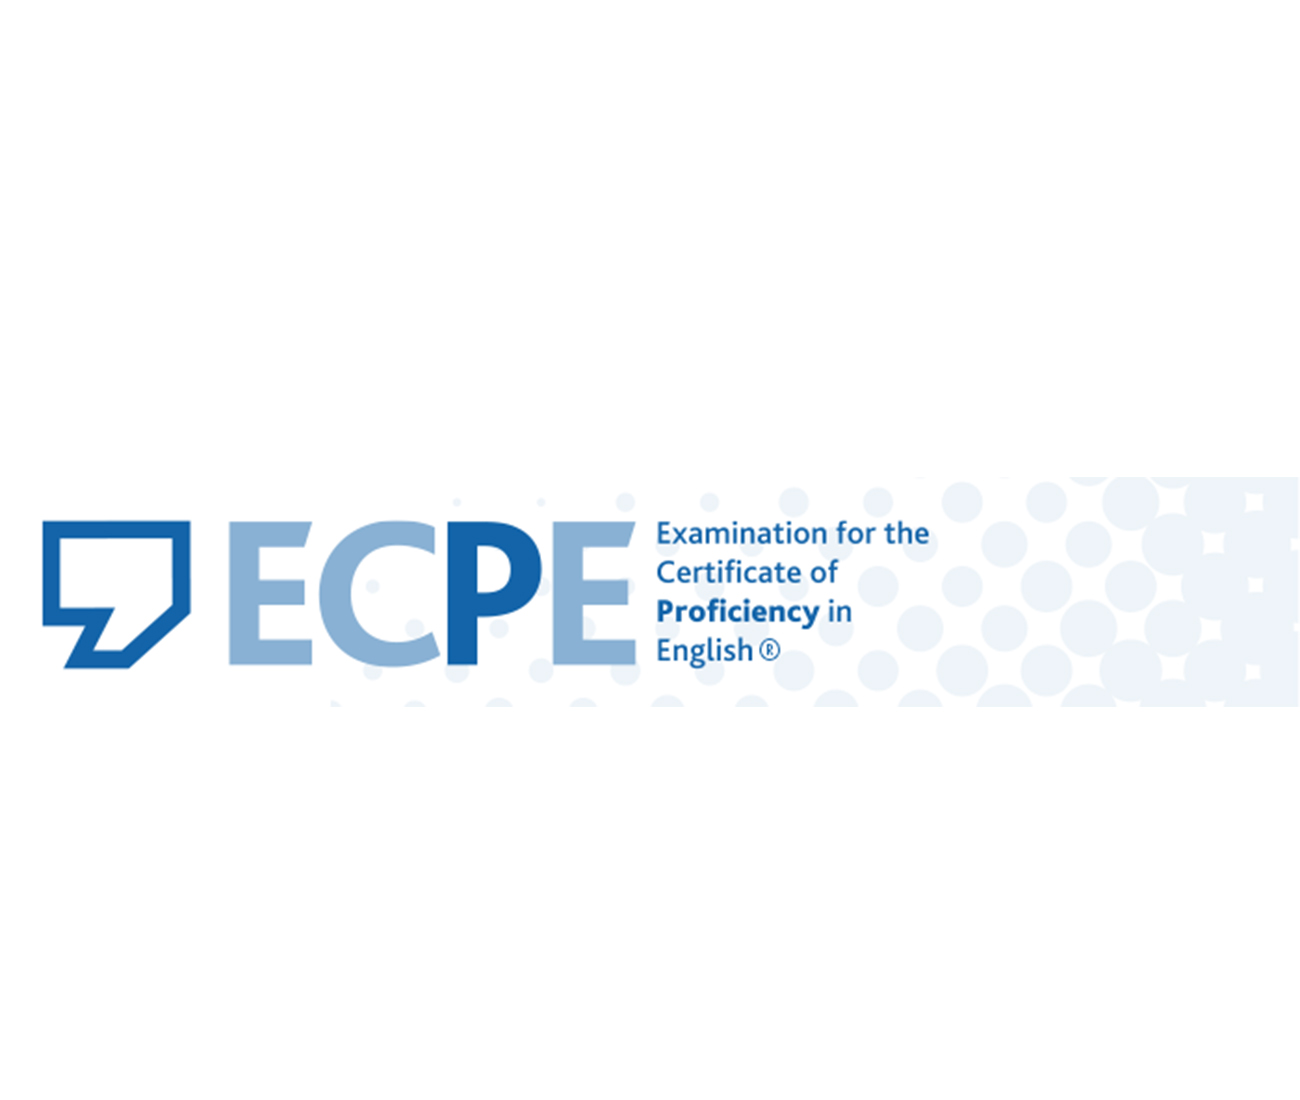 Examination for the Certificate of Proficiency in English (ECPE)